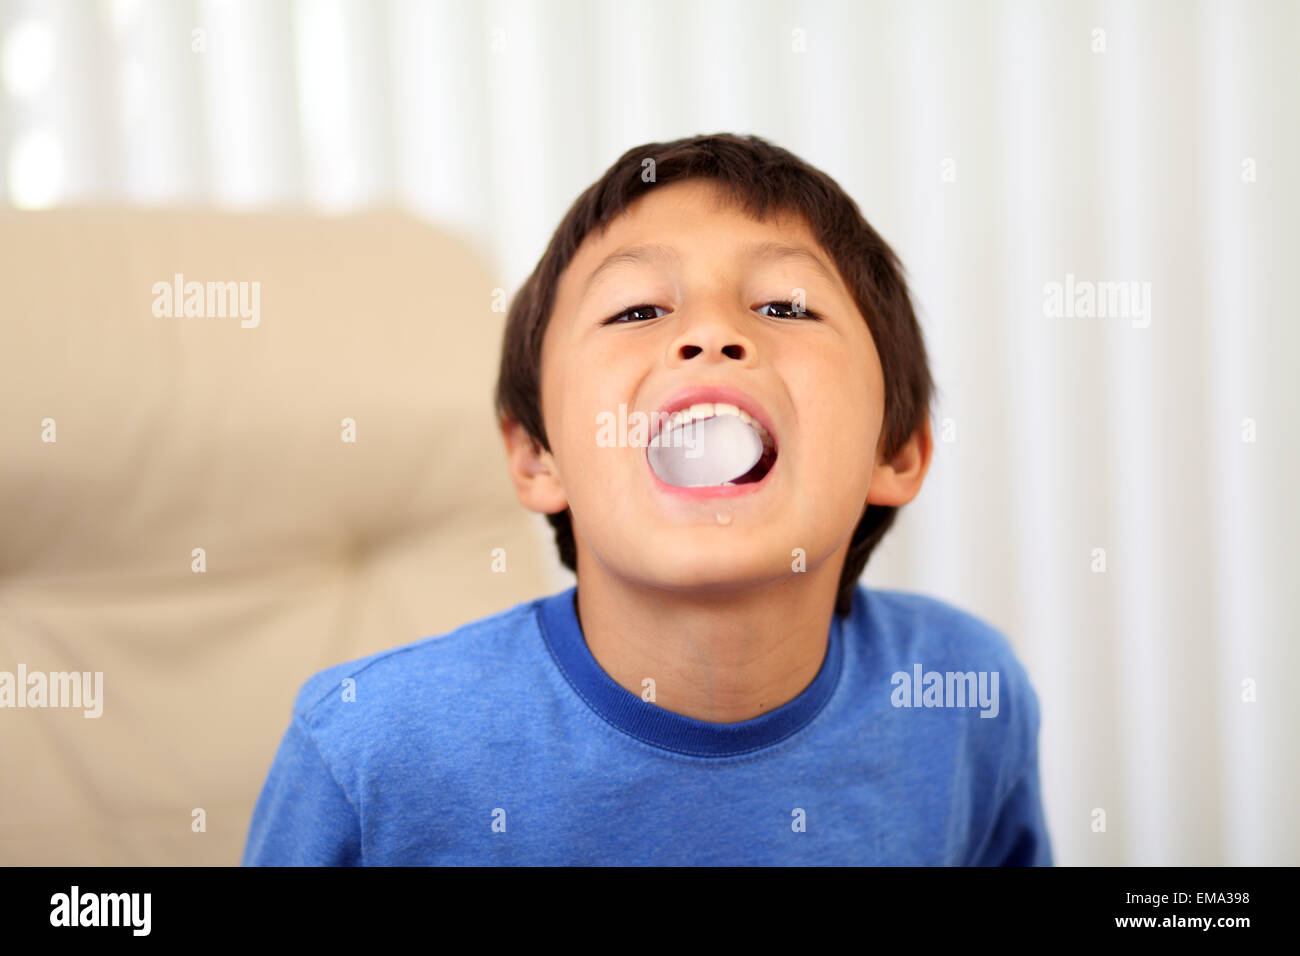 Young boy eating ice cube Banque D'Images